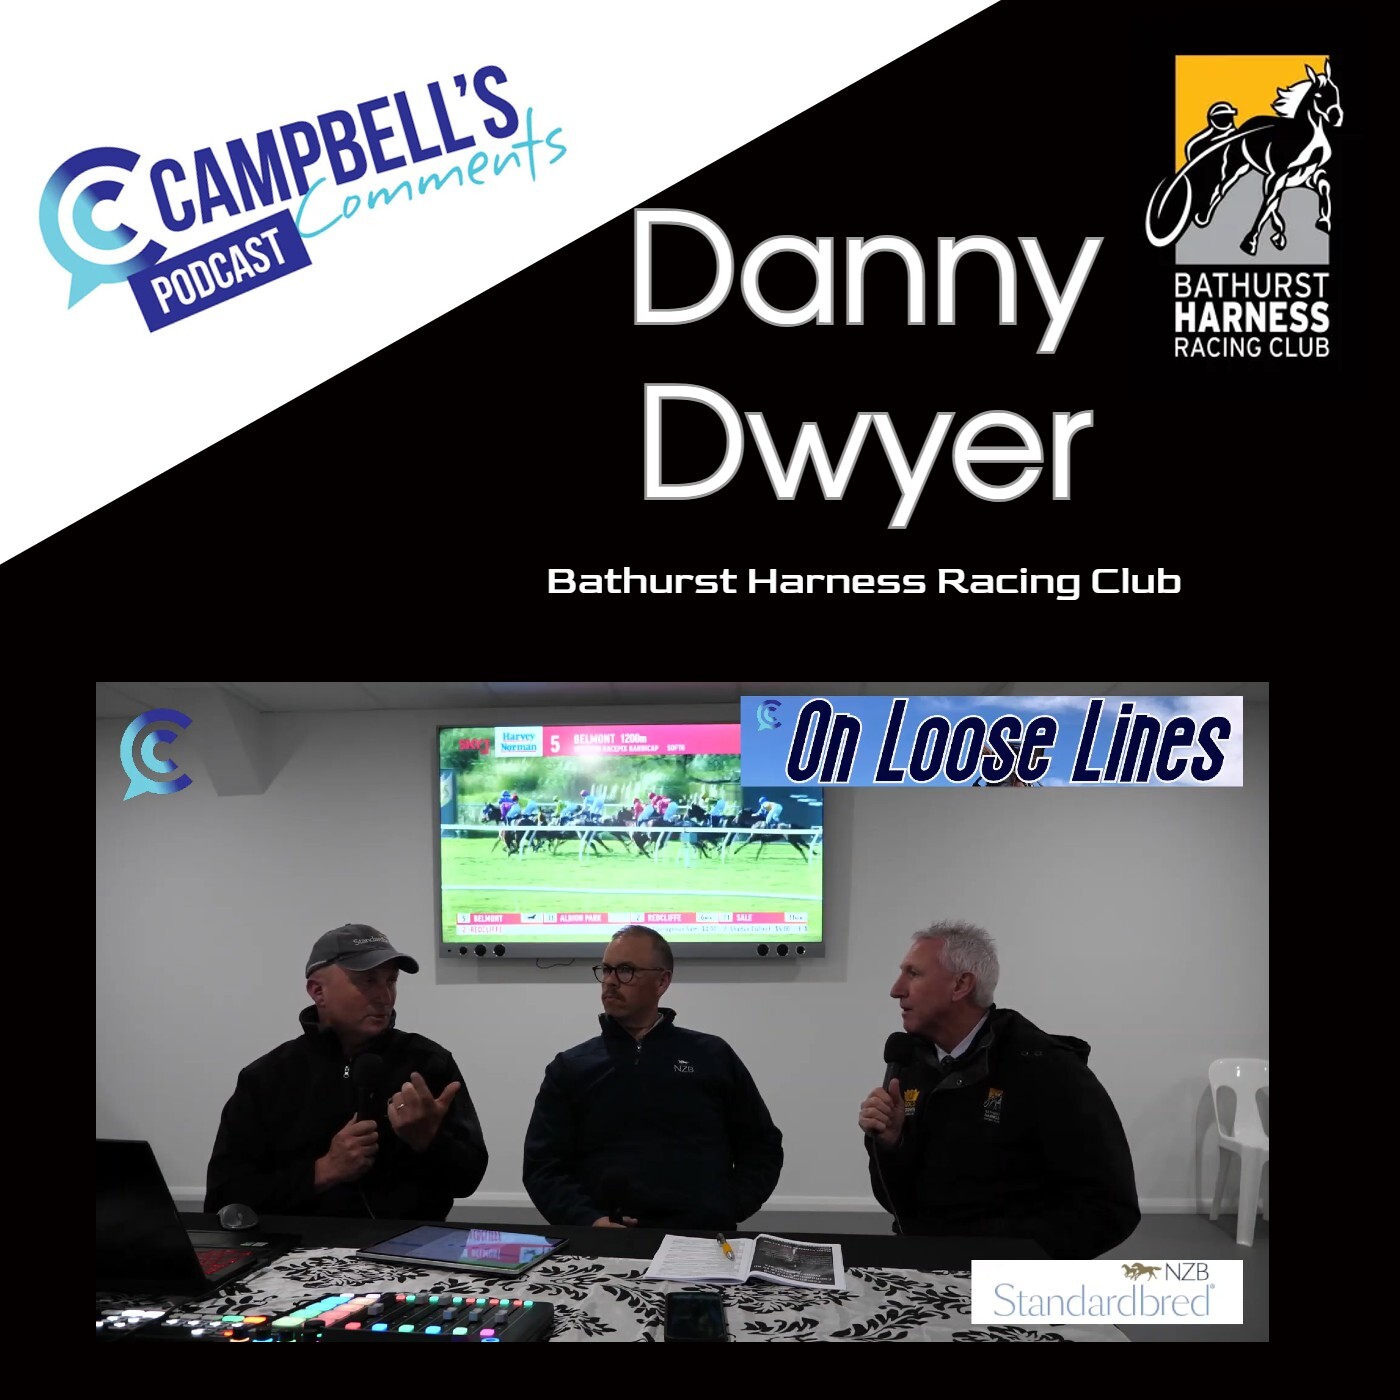 You are currently viewing 201: Campbells Comments with Danny Dwyer and Cam Bray On Loose Lines